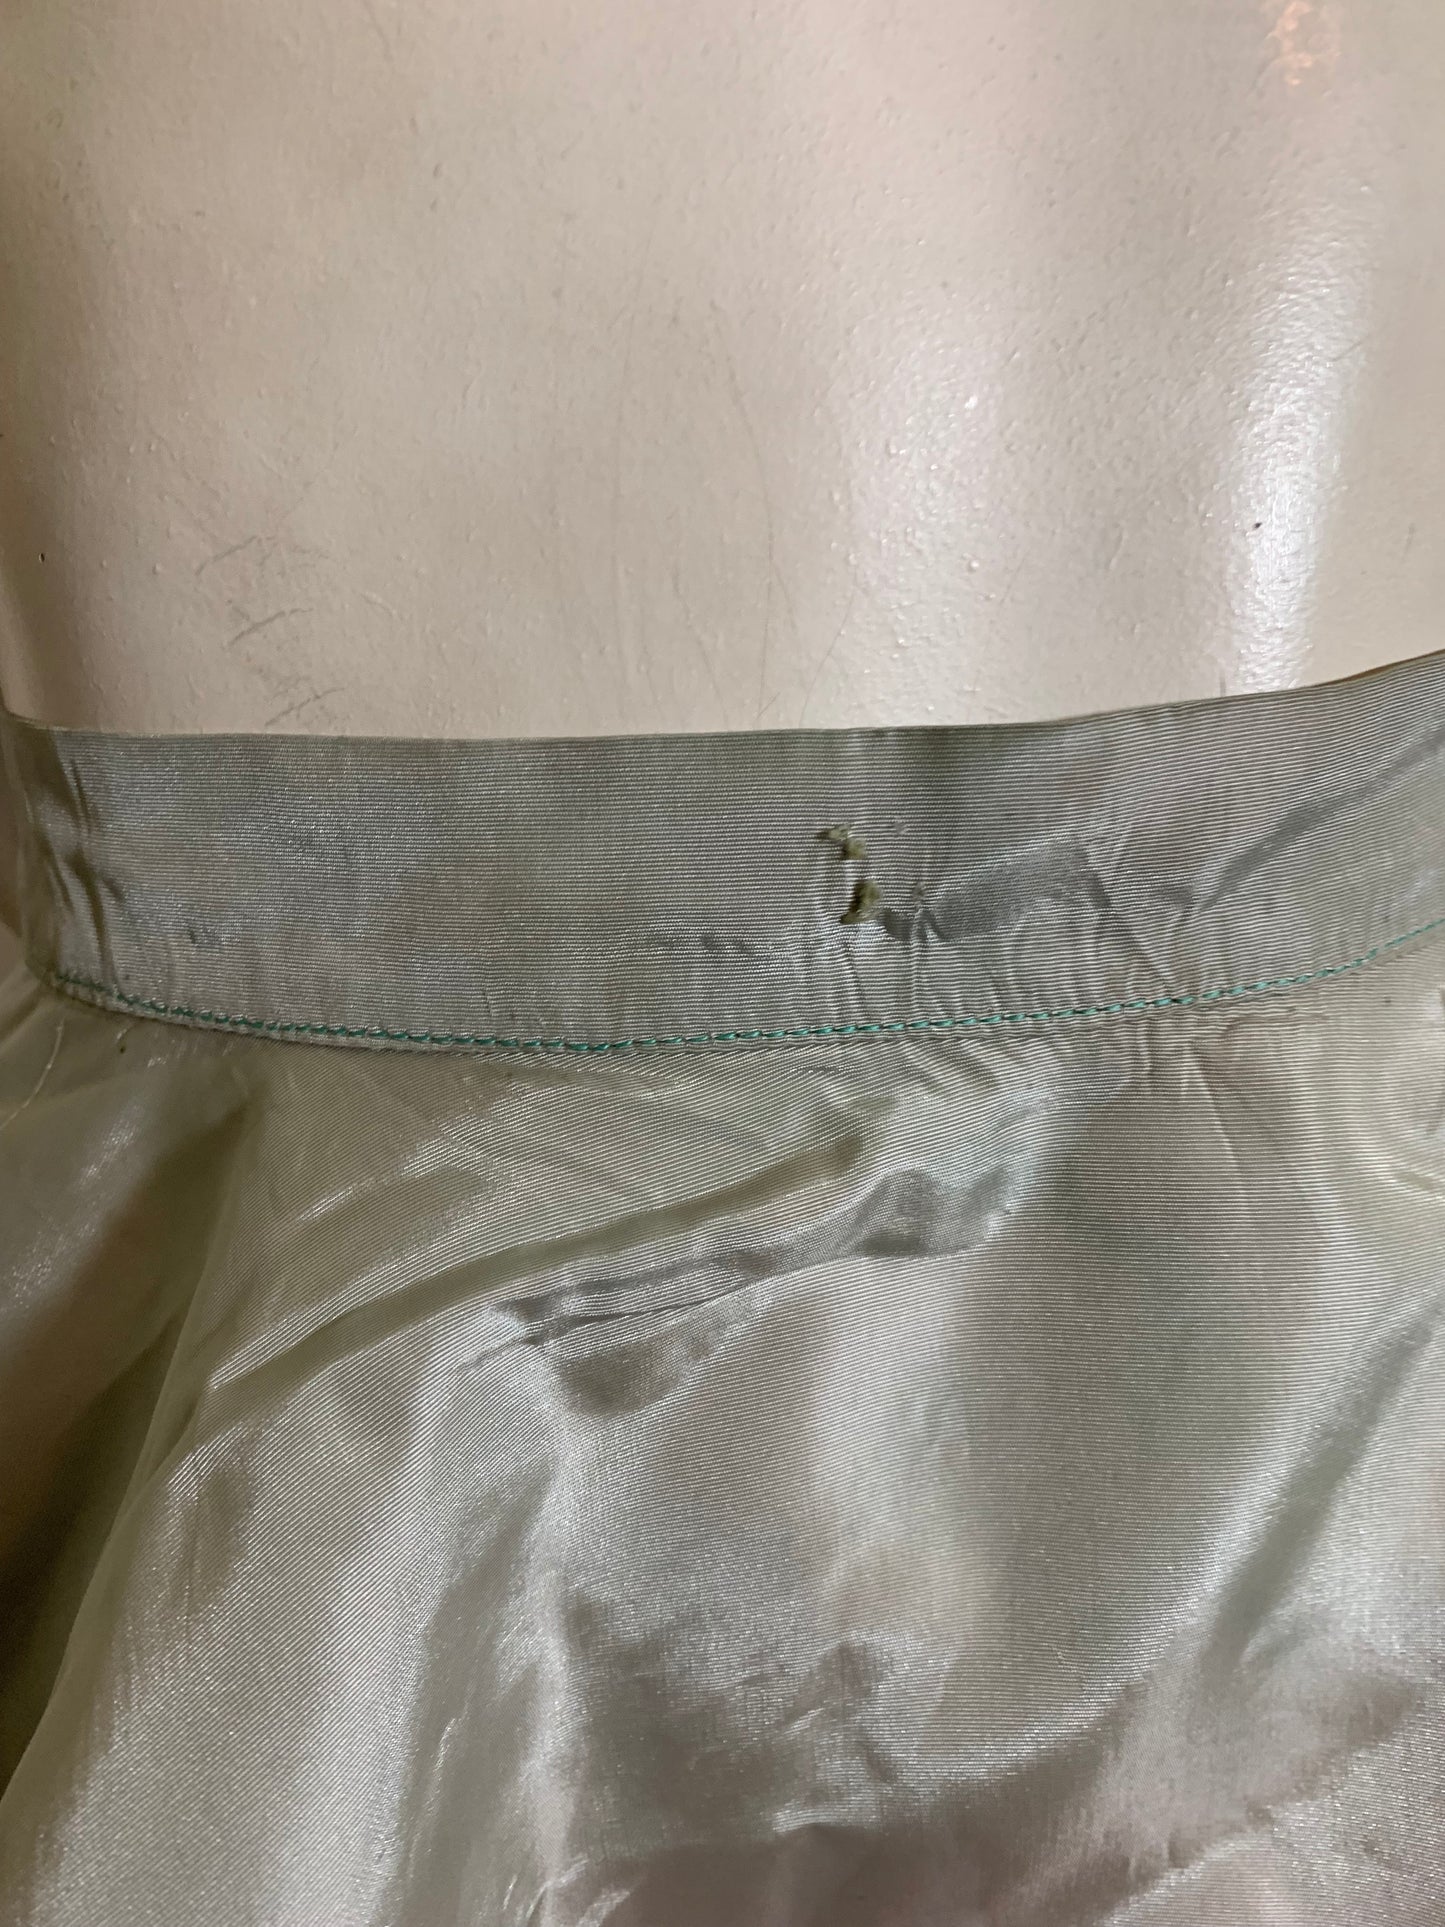 Soft Grey Taffeta Stage Wear Overkirt with Bow and Pink Tulle circa 1940s